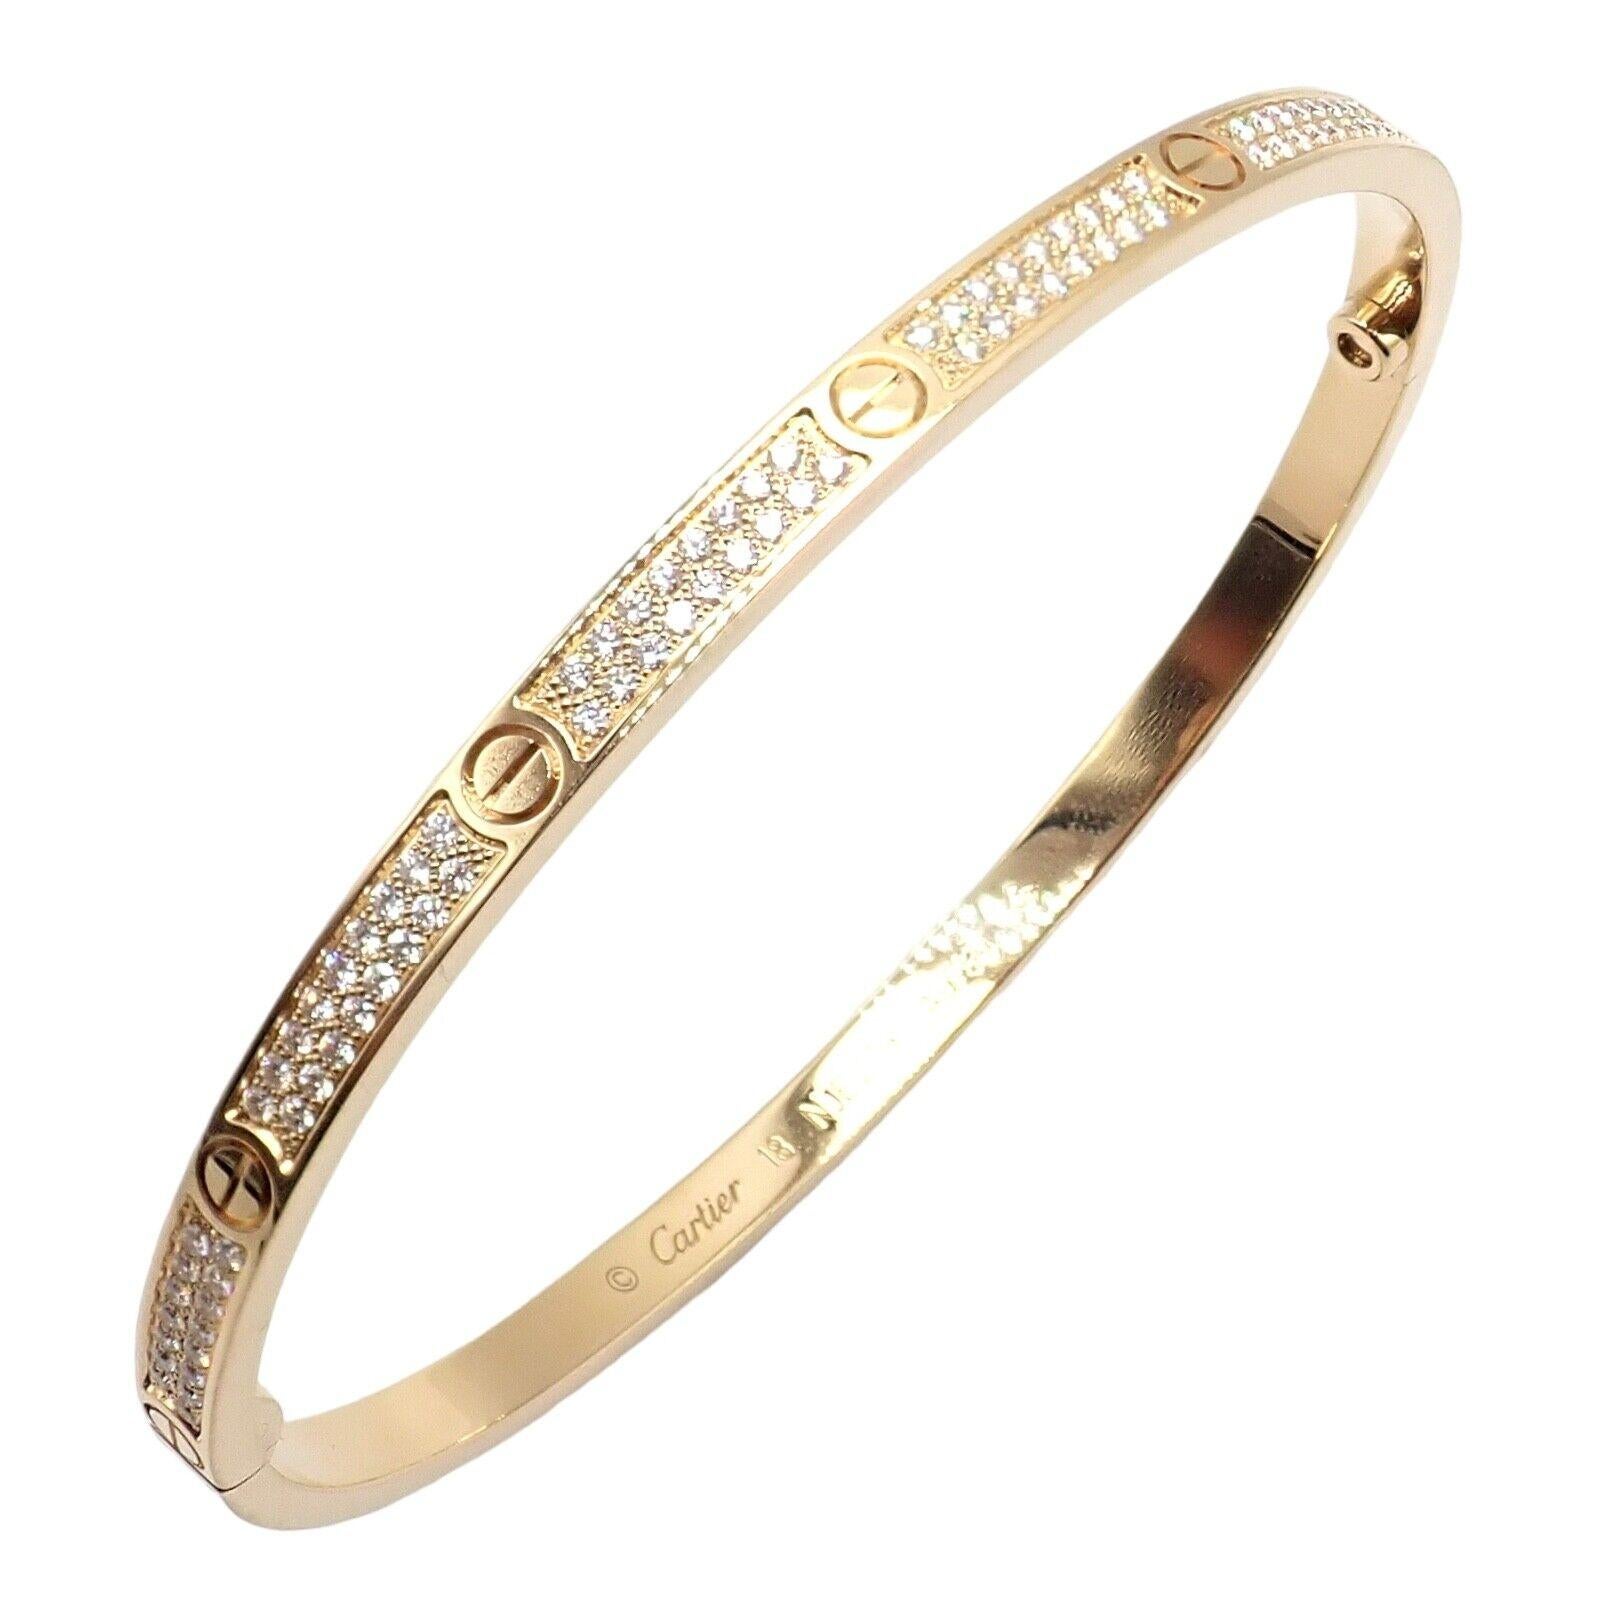 Cartier Love Pave Diamond Small Model Yellow Gold Bangle Bracelet In Excellent Condition For Sale In Holland, PA